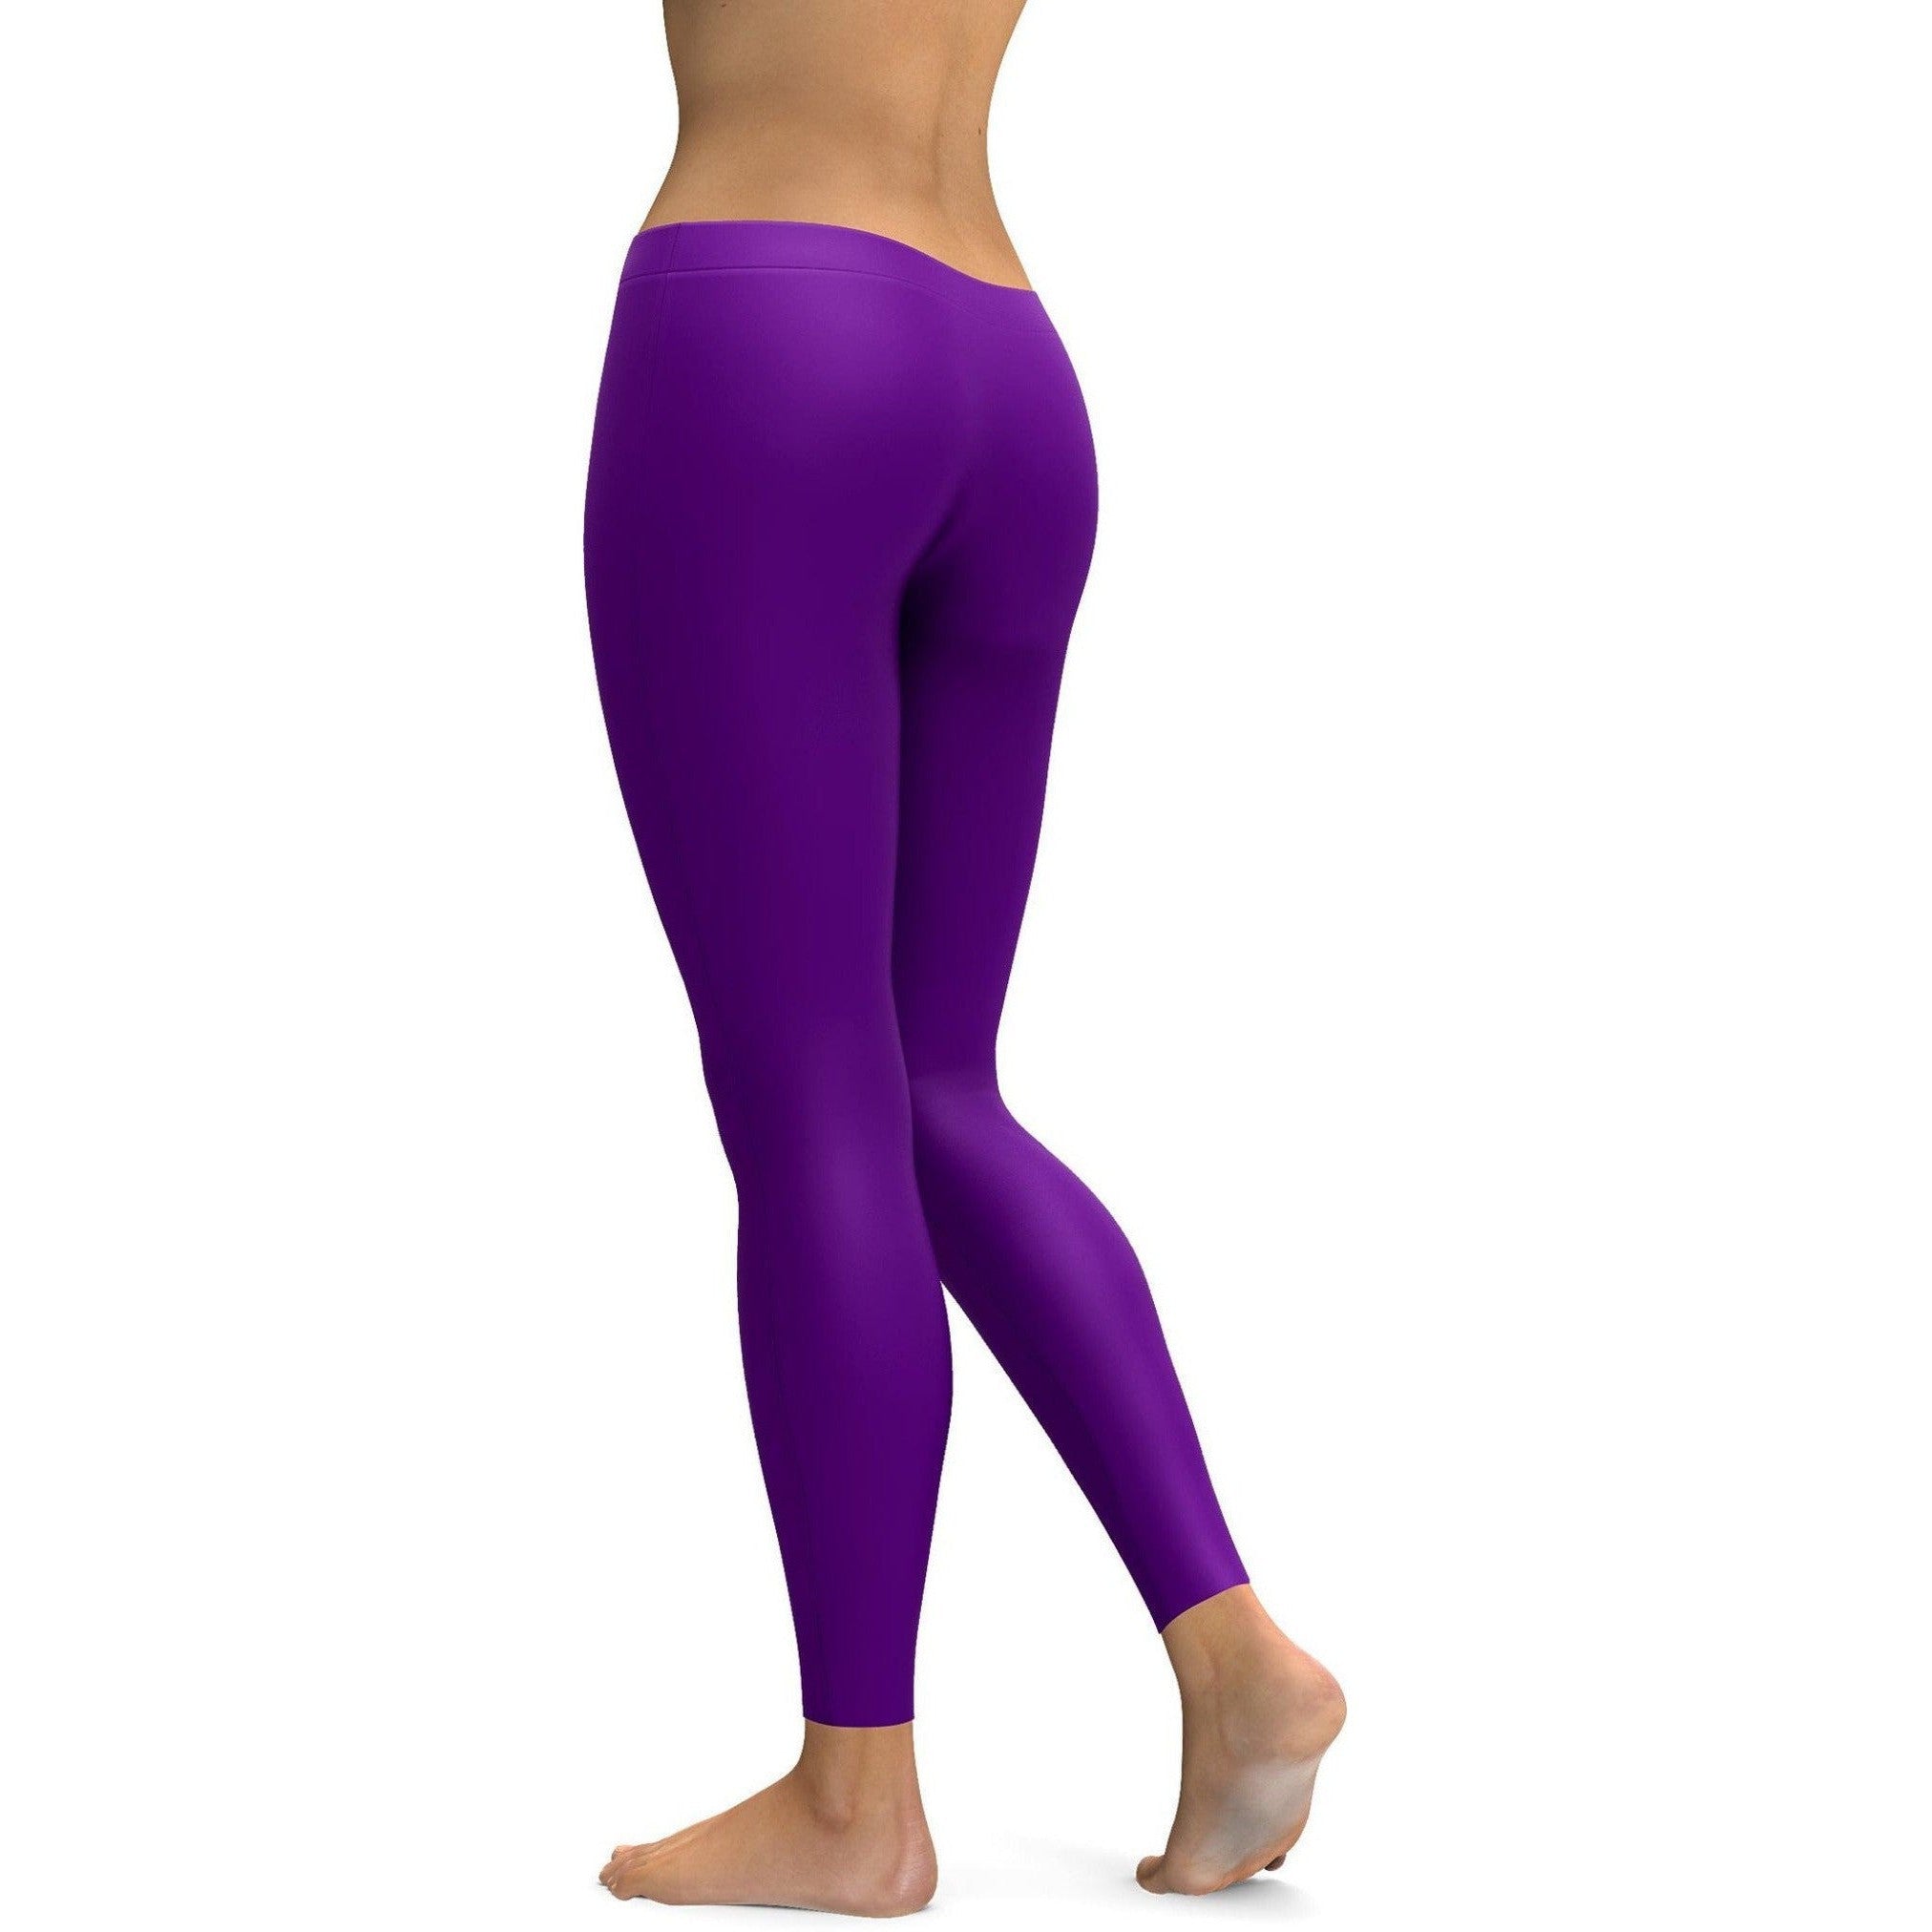 What Colors Go With Purple Leggings